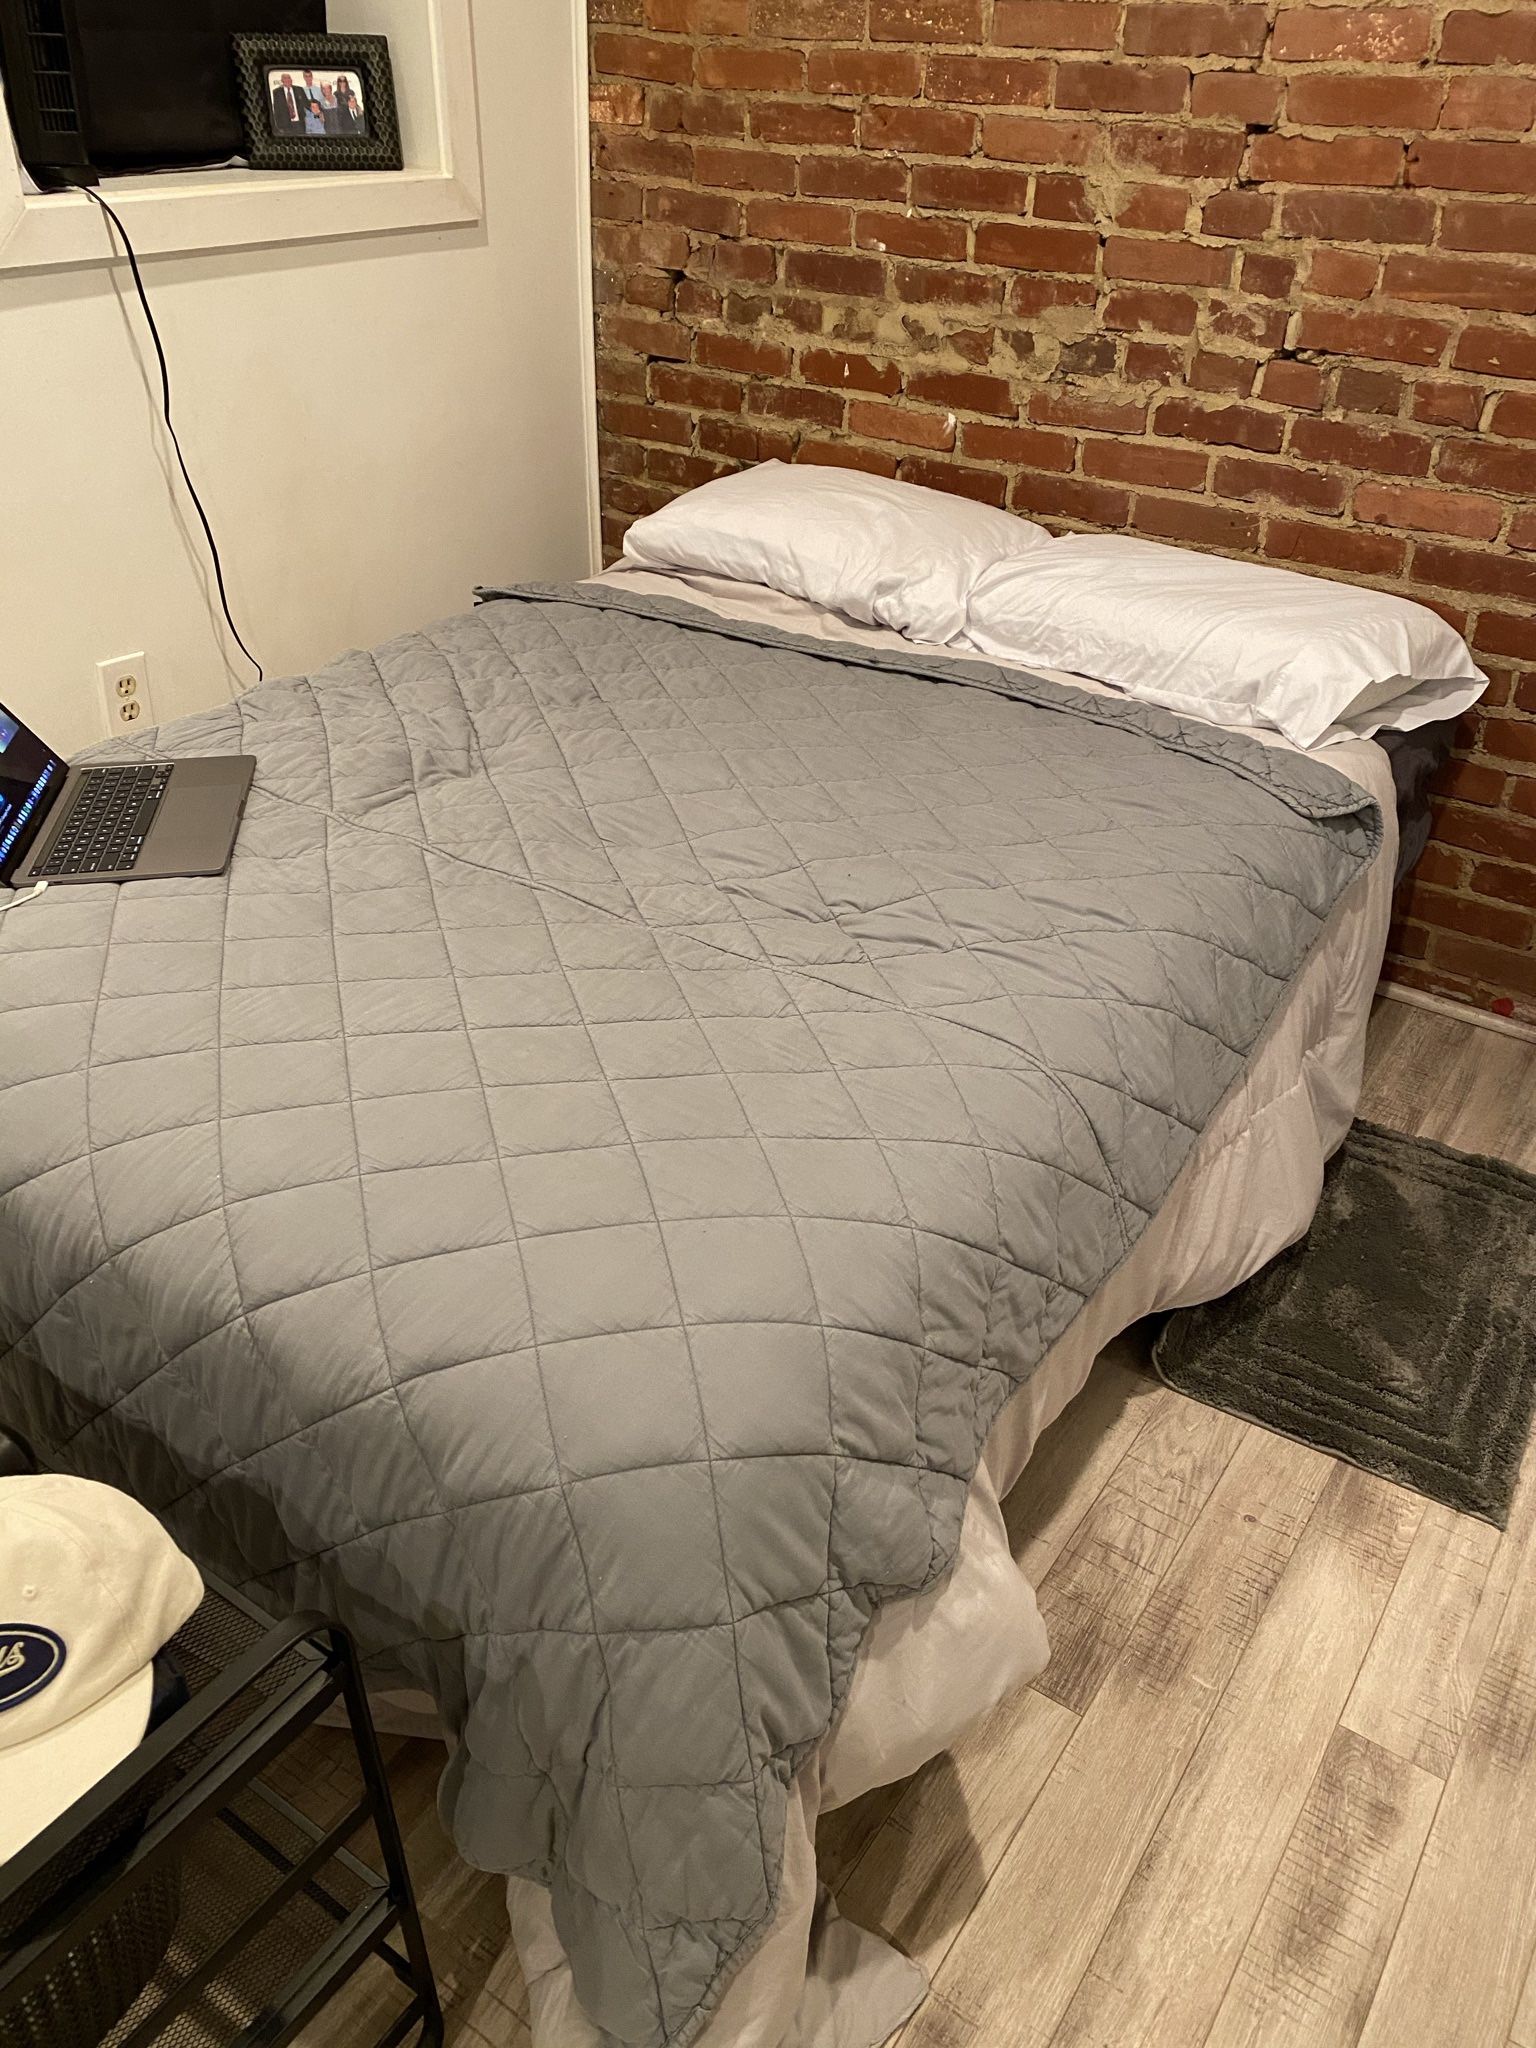 Bed with temper pedic pad and pillows, weighted blanket, frame and mattress